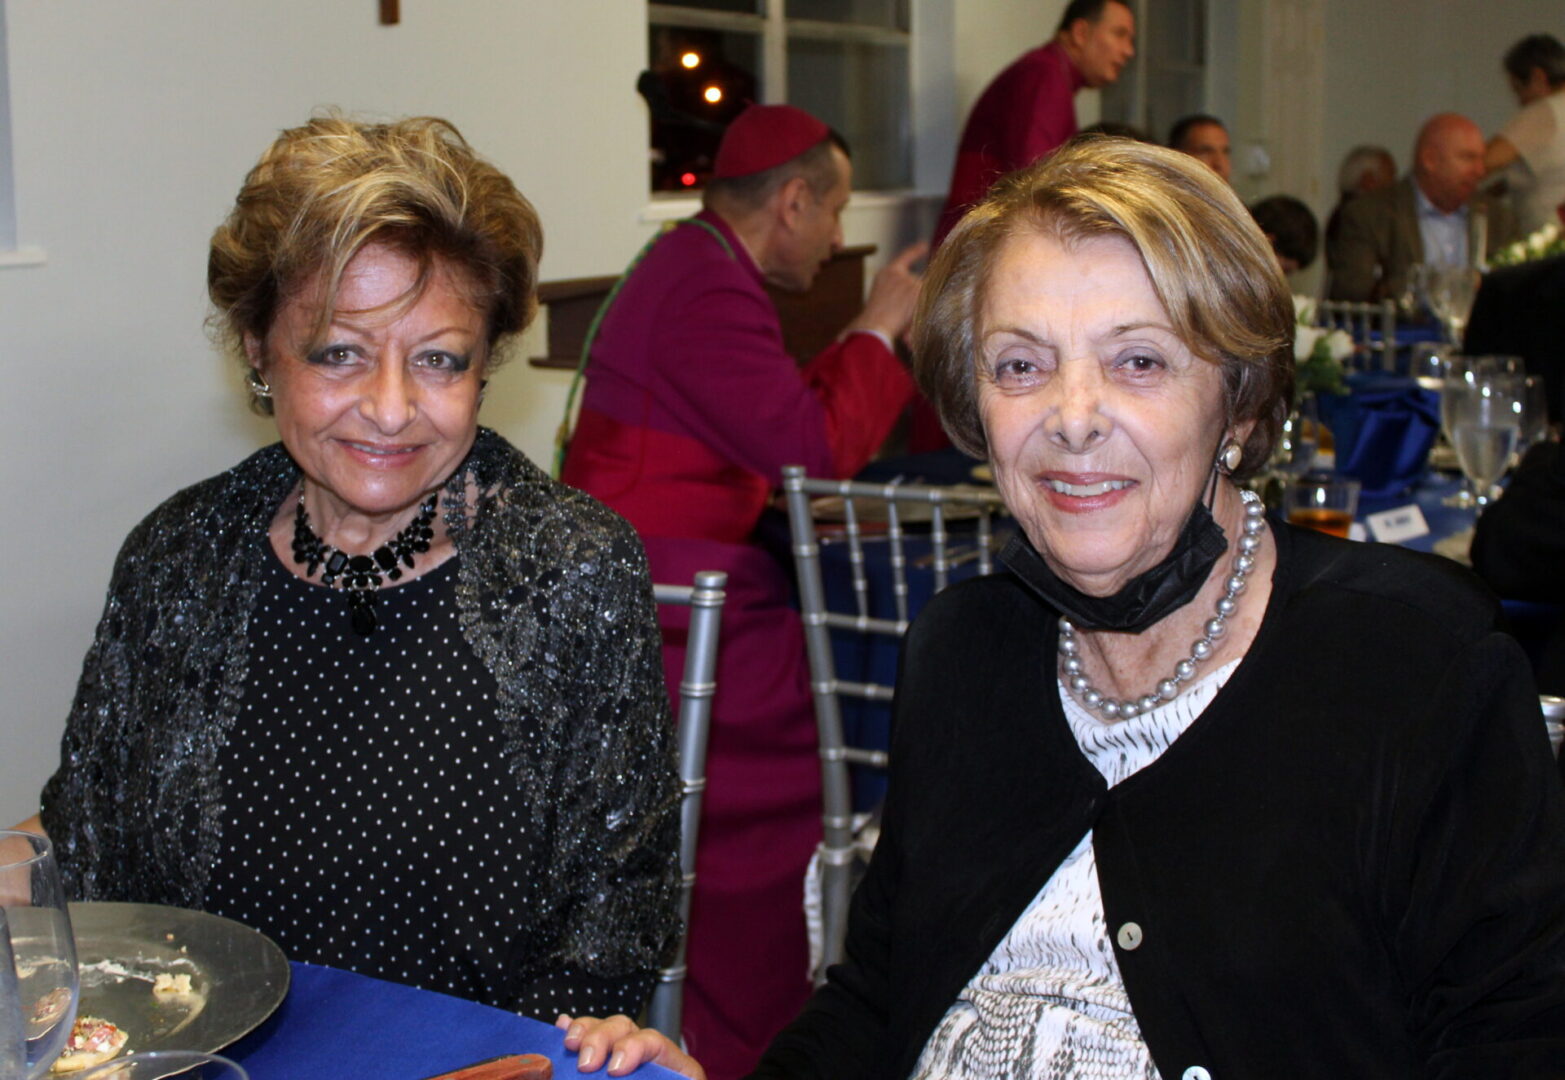 Two old women wearing black and white pearls